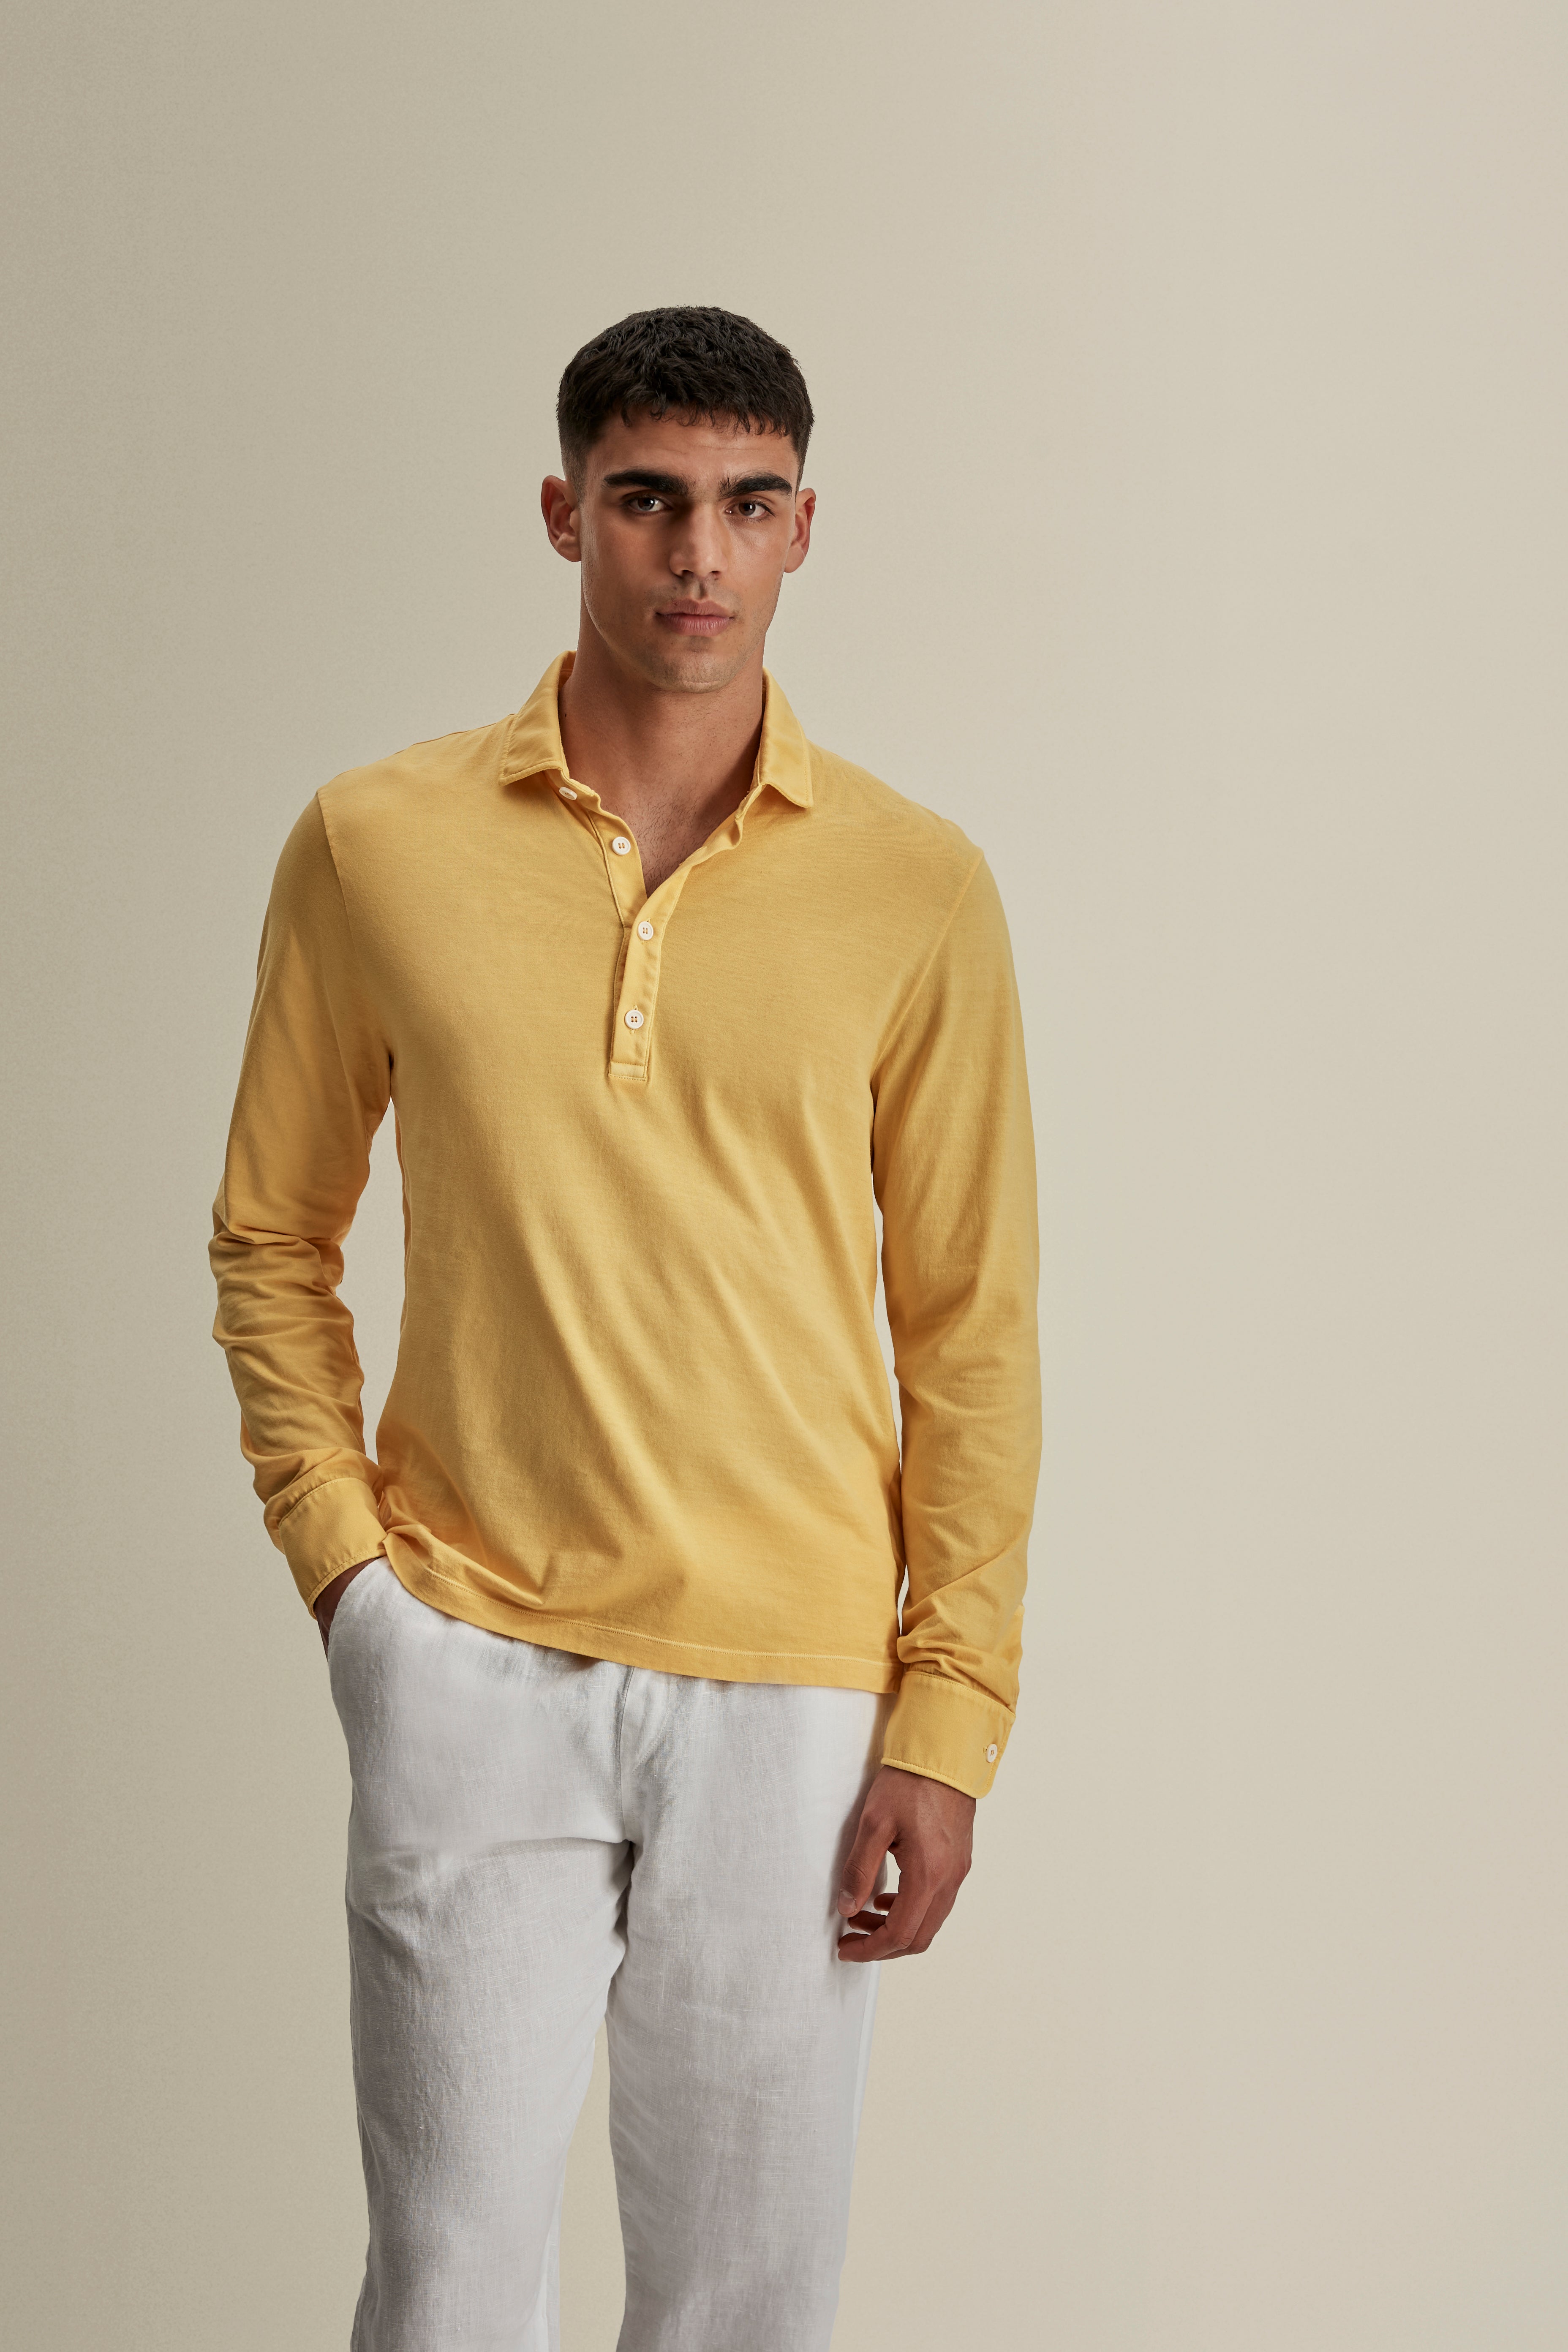 Cotton Long Sleeve Polo Shirt Canary Yellow Mid Crop Model Image